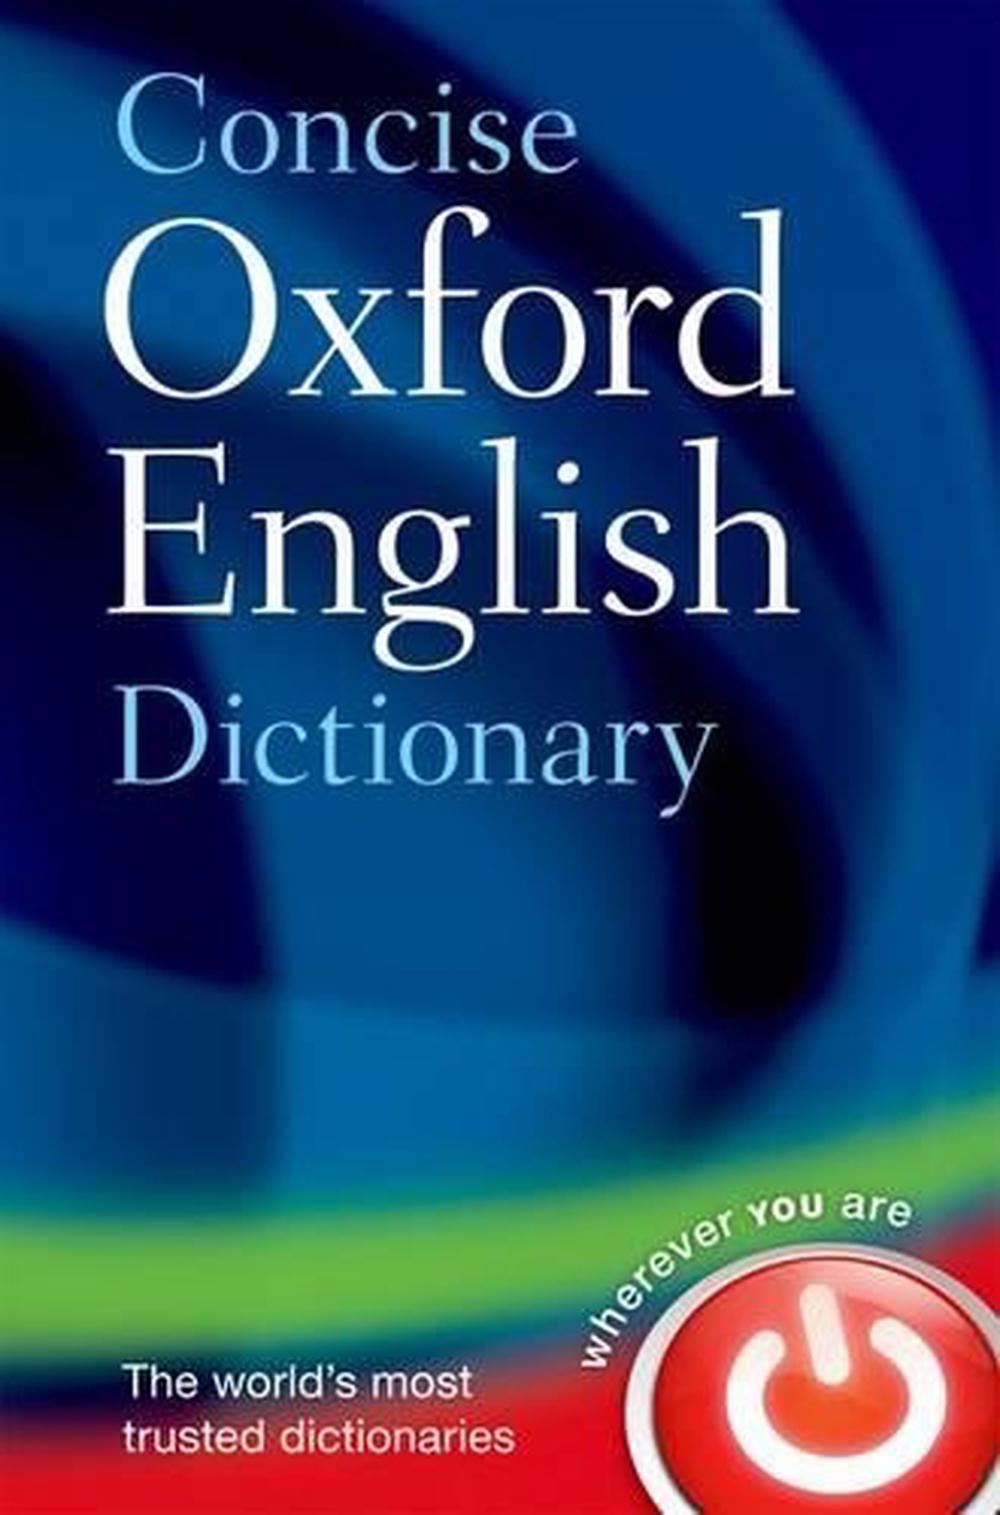 concise-oxford-english-dictionary-by-oxford-dictionaries-hardcover